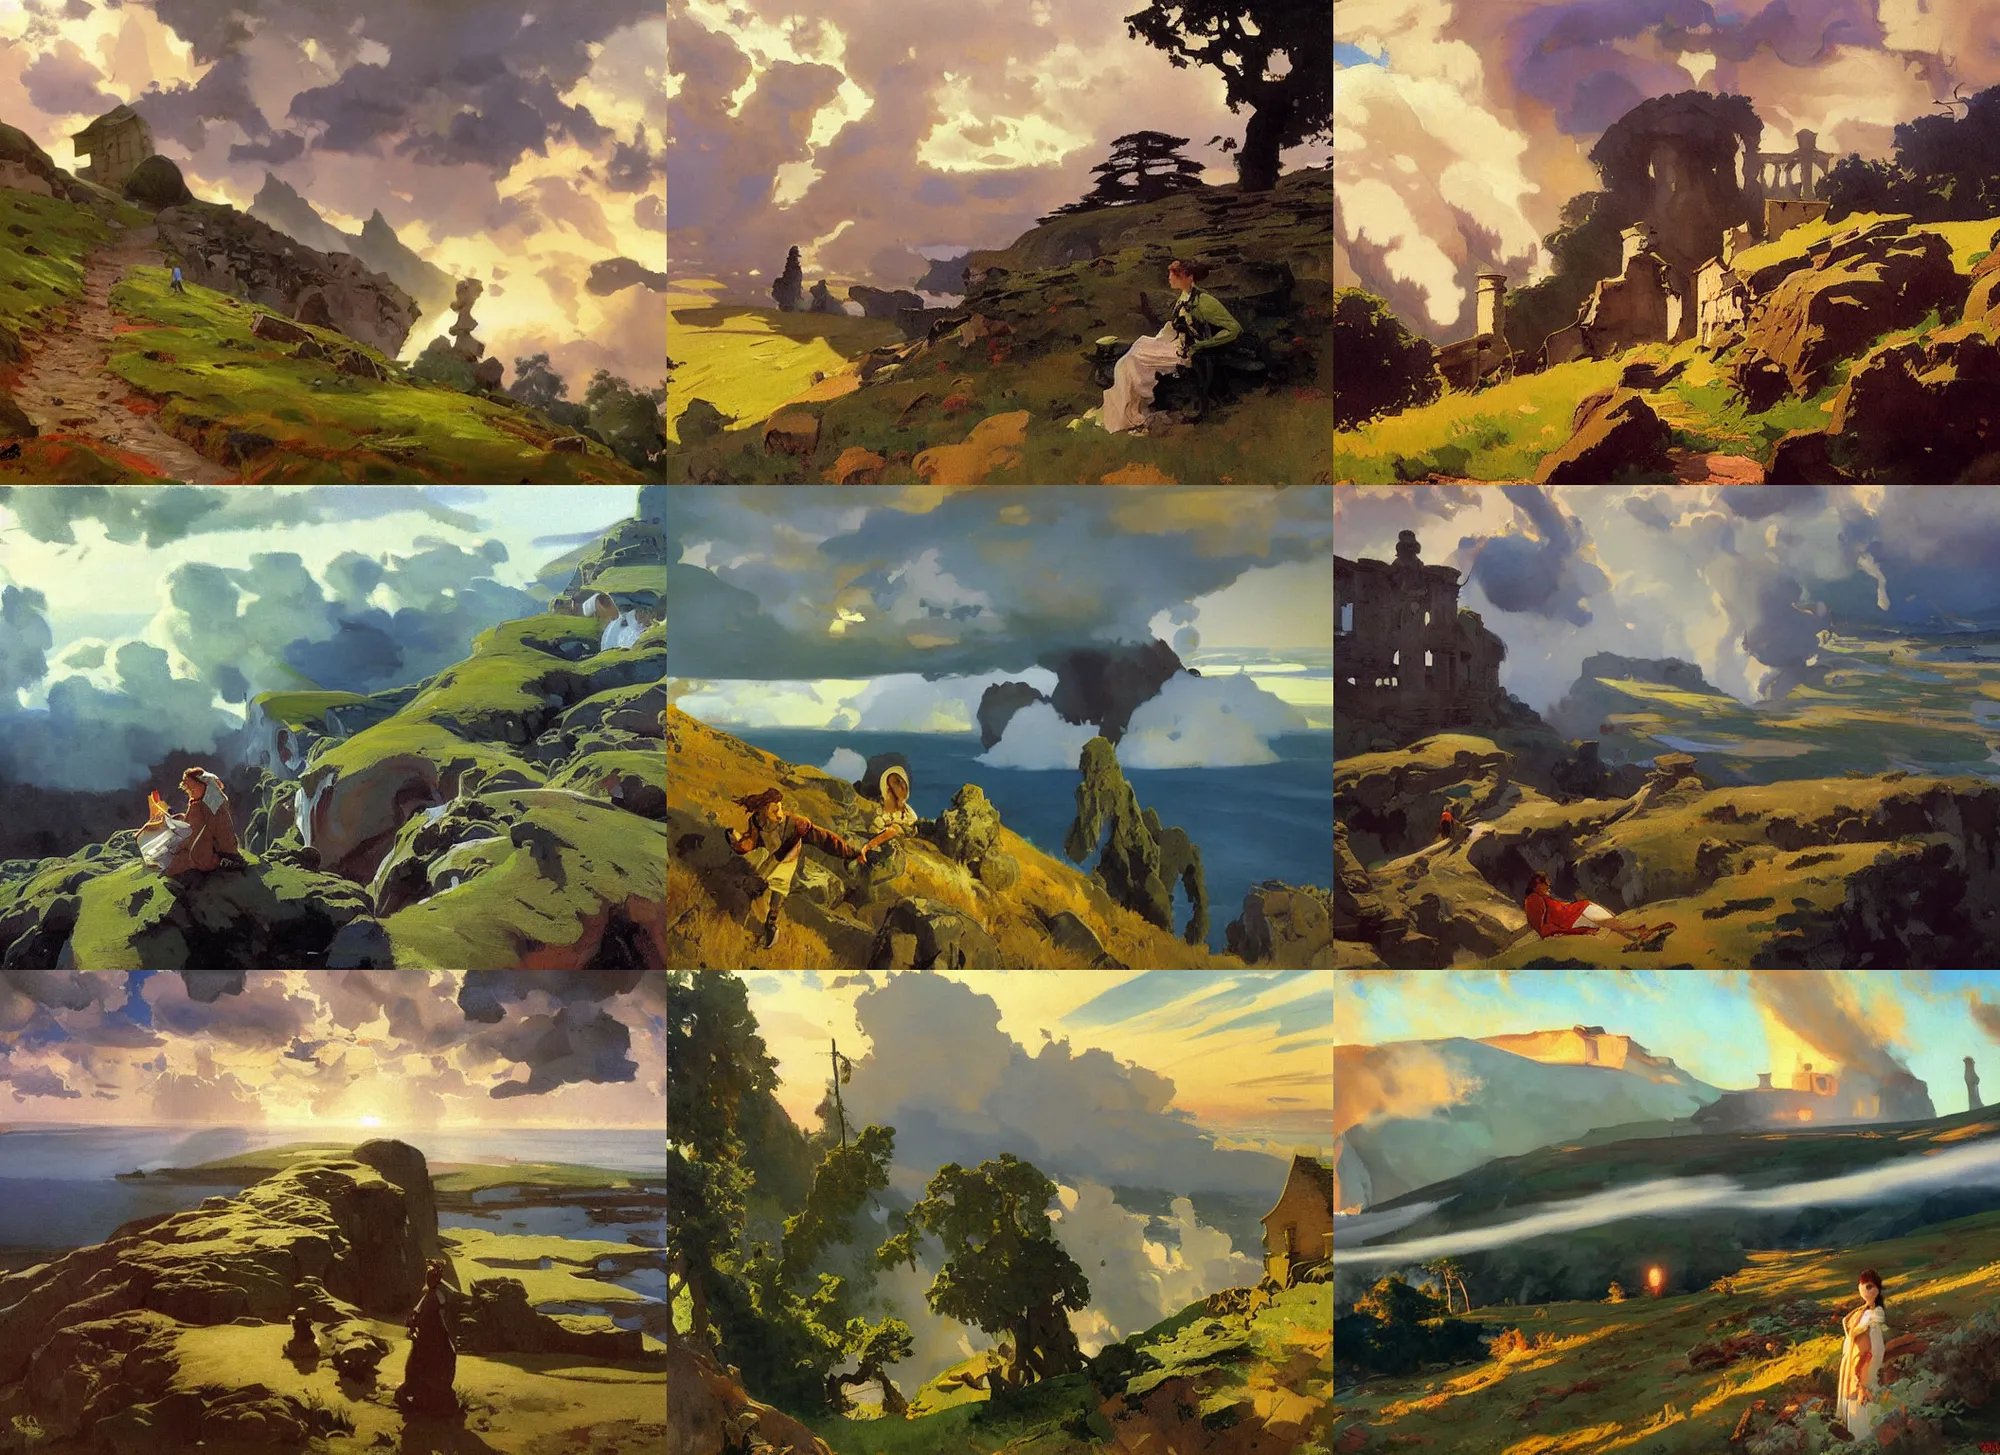 Prompt: painting by sargent and leyendecker and greg hildebrandt savrasov levitan polenov, studio ghibly style mononoke, huge old ruins, middle earth above the layered low clouds road between forests trees sunrise sunset sea bay view faroe azores overcast storm masterpiece